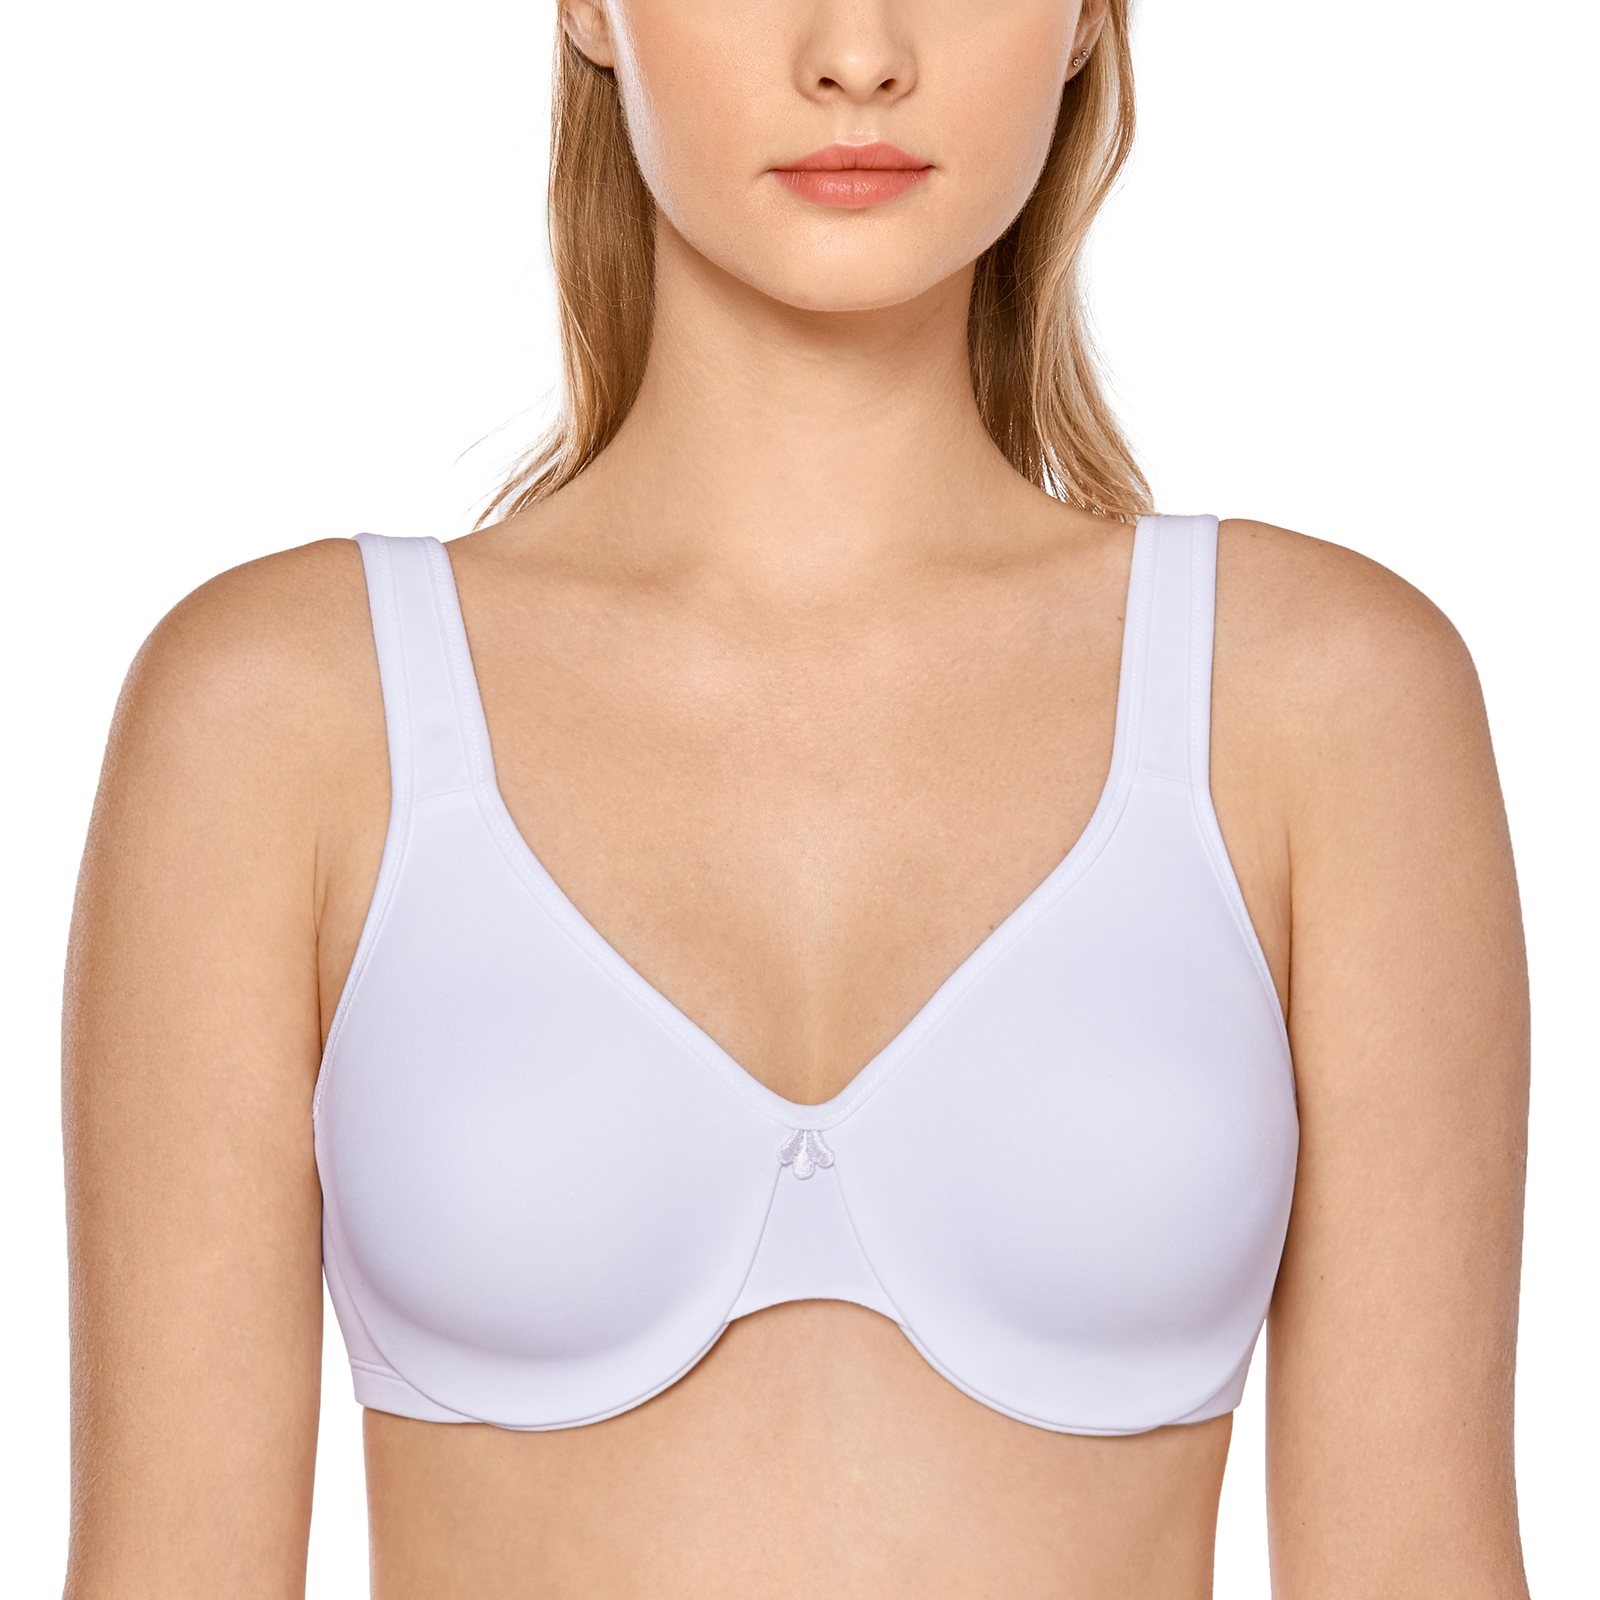 Delimira Minimizer Bra for Women Plus Size Smooth Full Coverage Underwire  Non Padded Support Seamless T